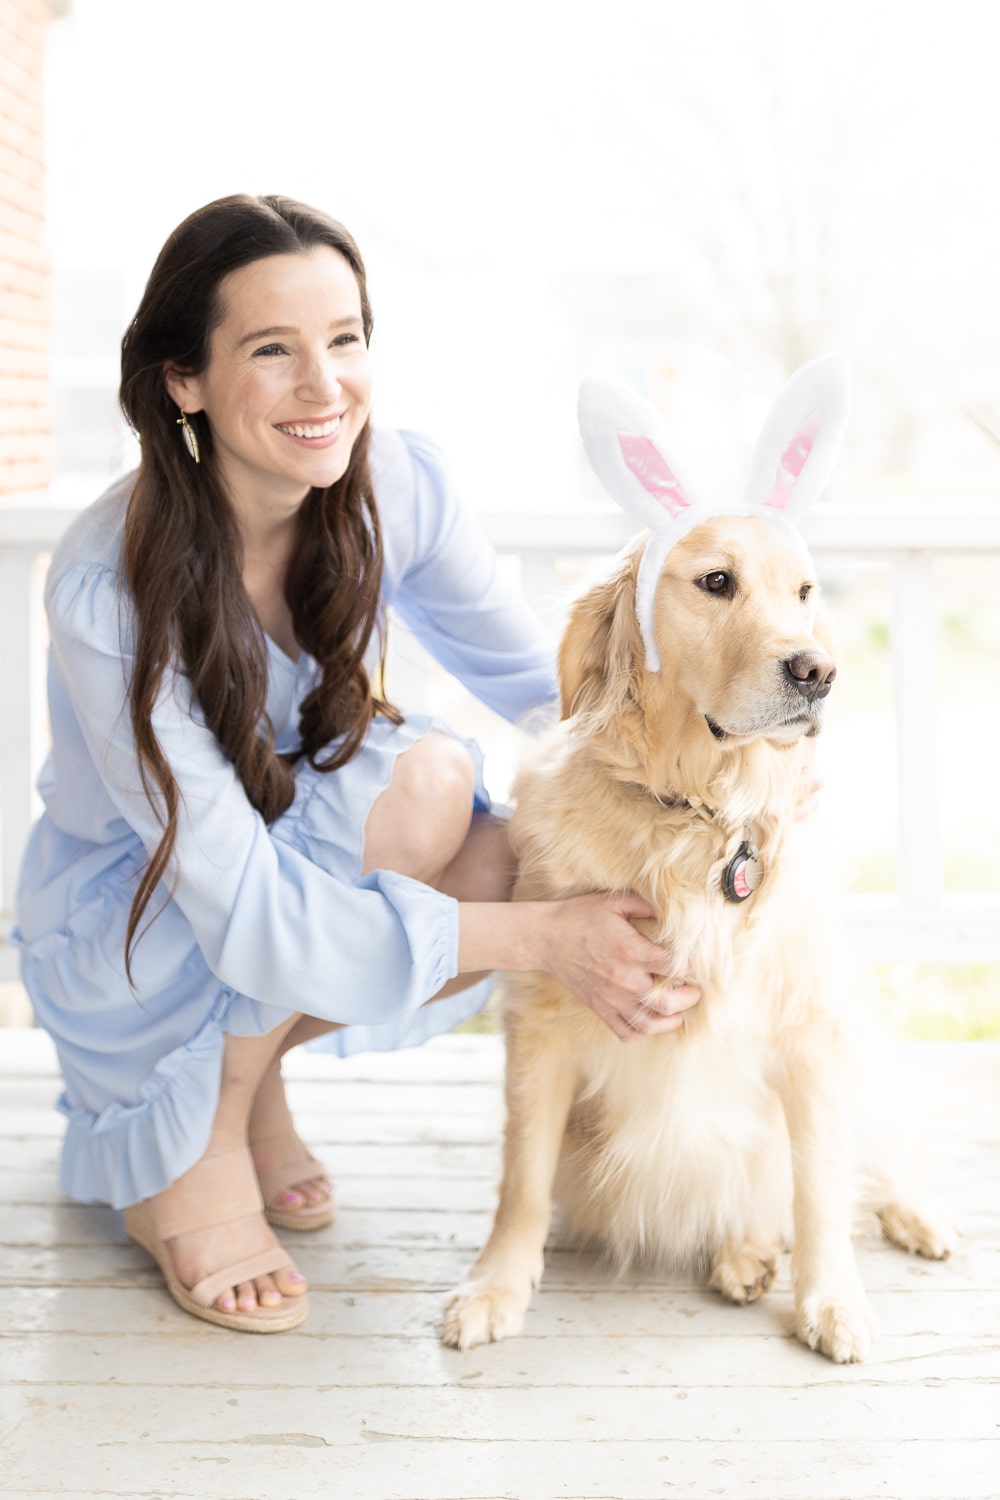 Dog Easter basket ideas rounded up by blogger Stephanie Ziajka on Diary of a Debutante